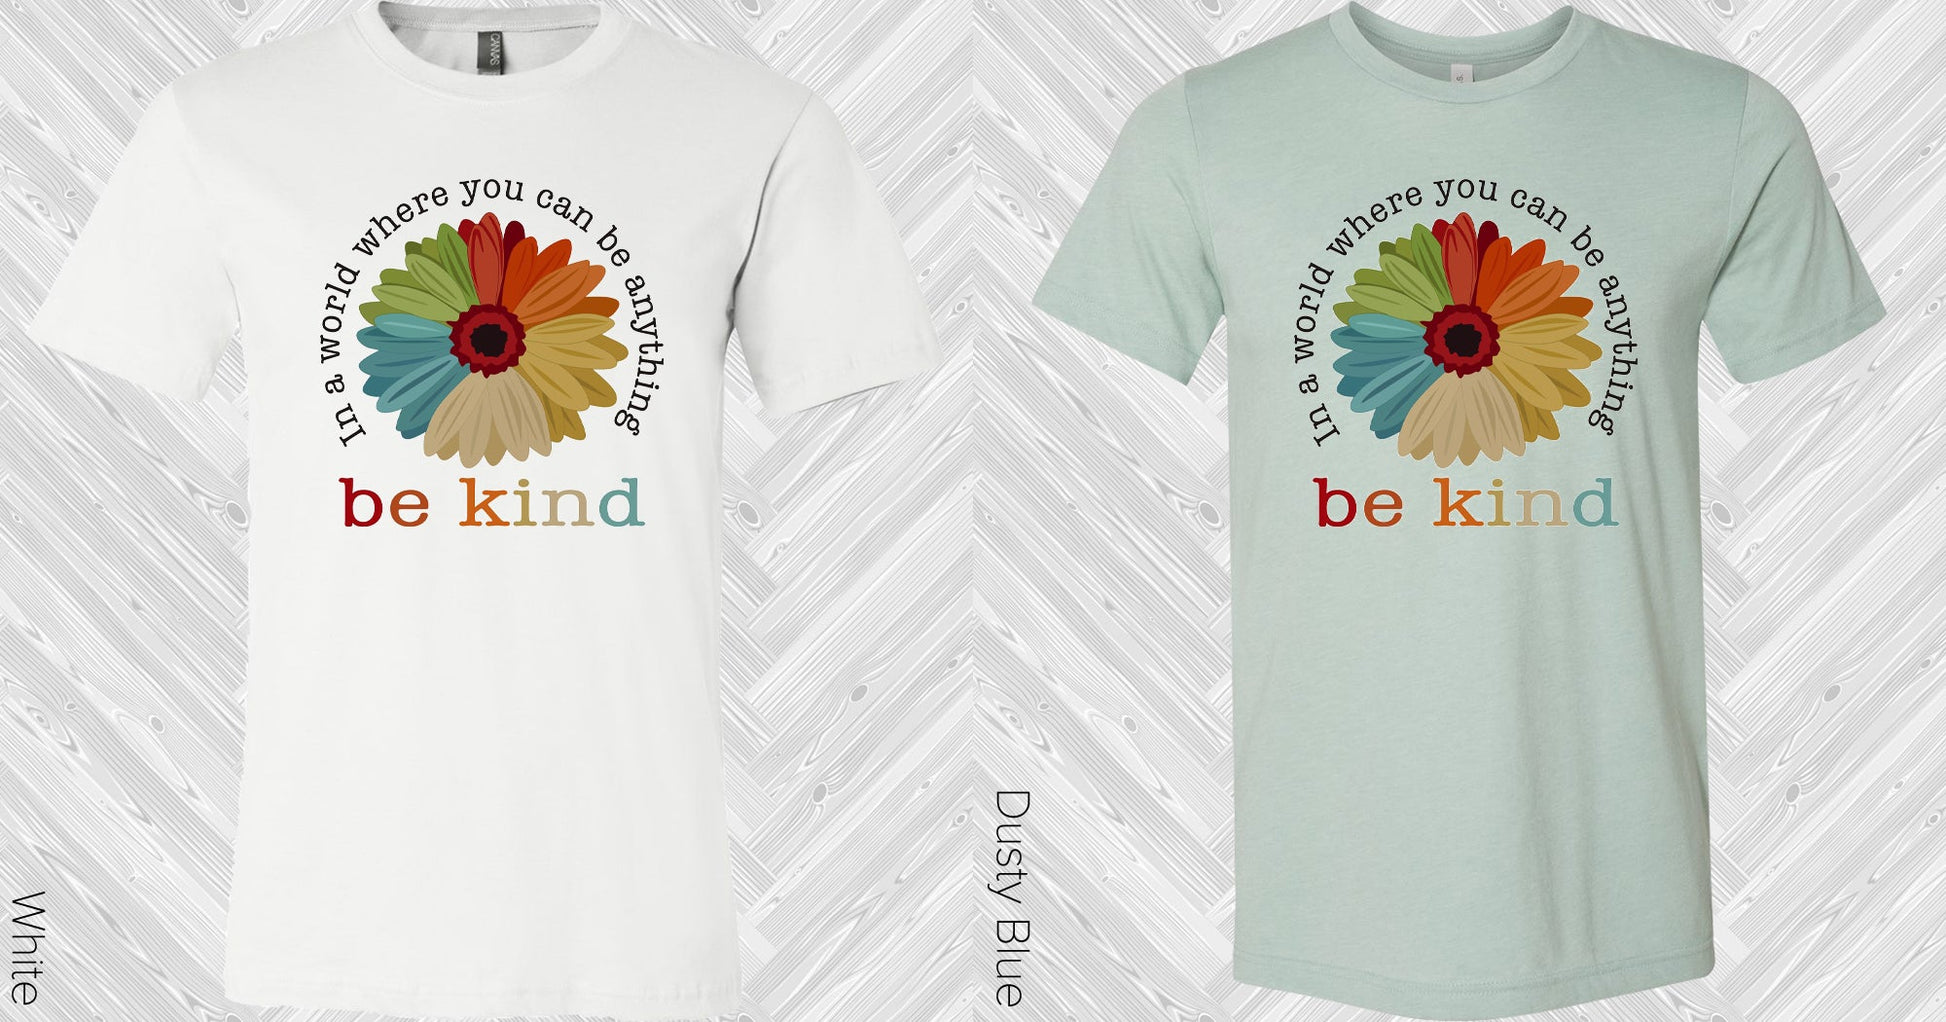 In A World Where You Can Be Anything Kind Graphic Tee Graphic Tee